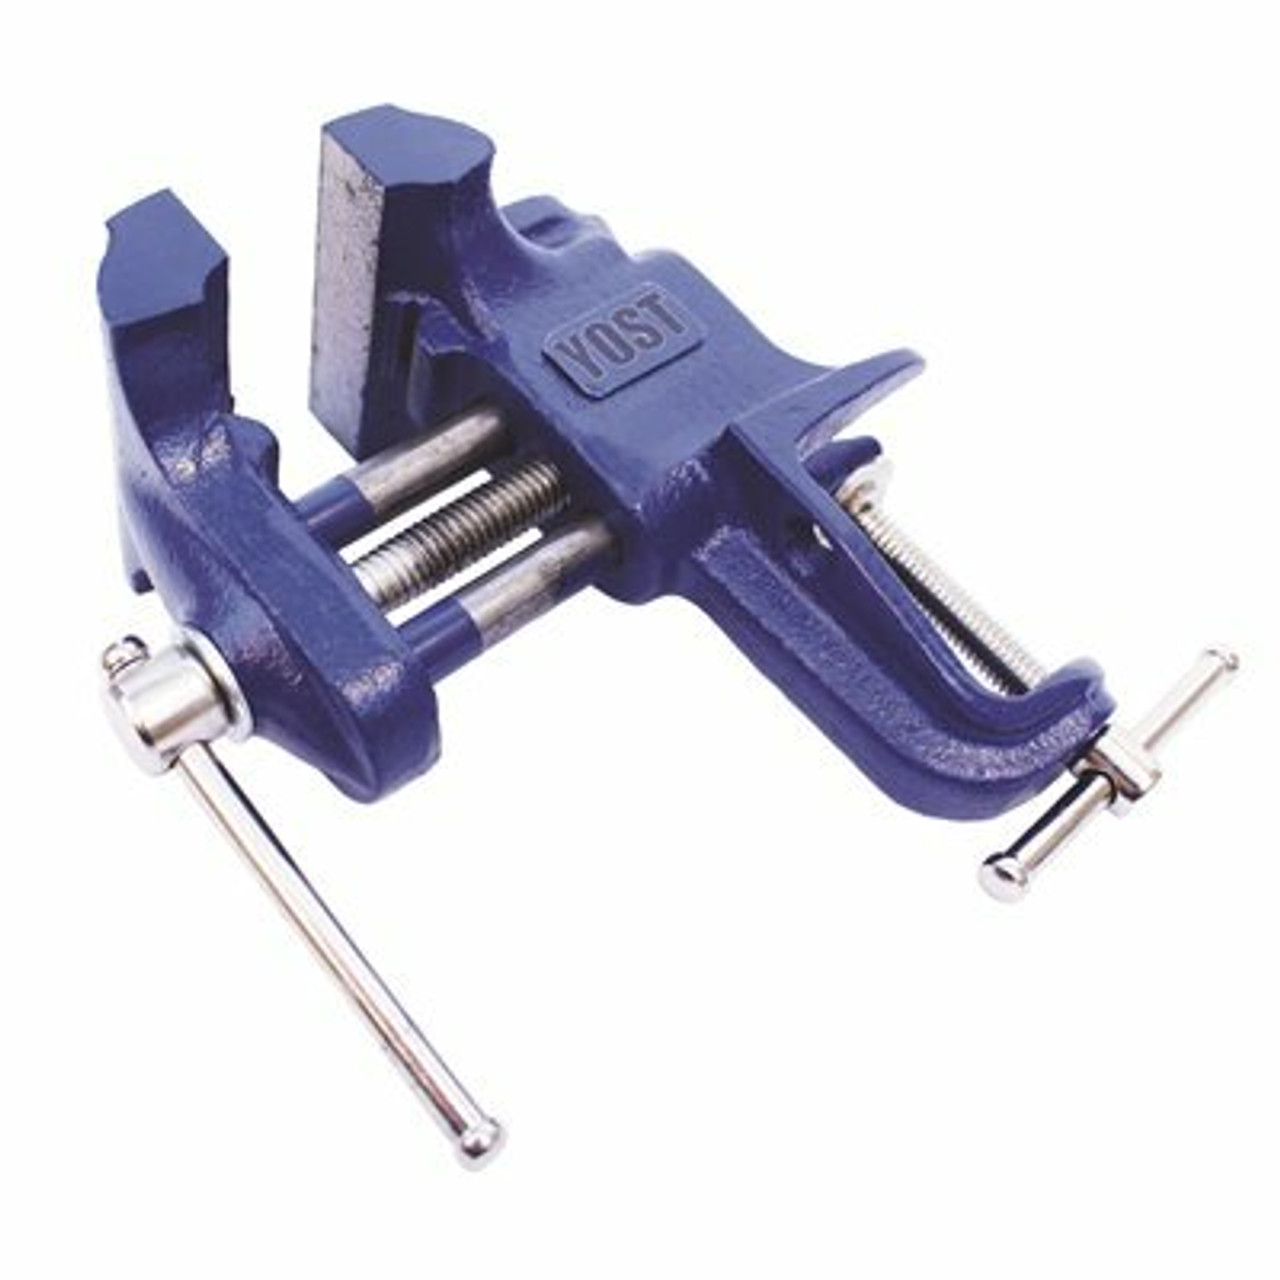 Yost 3 In. Clamp On Vise